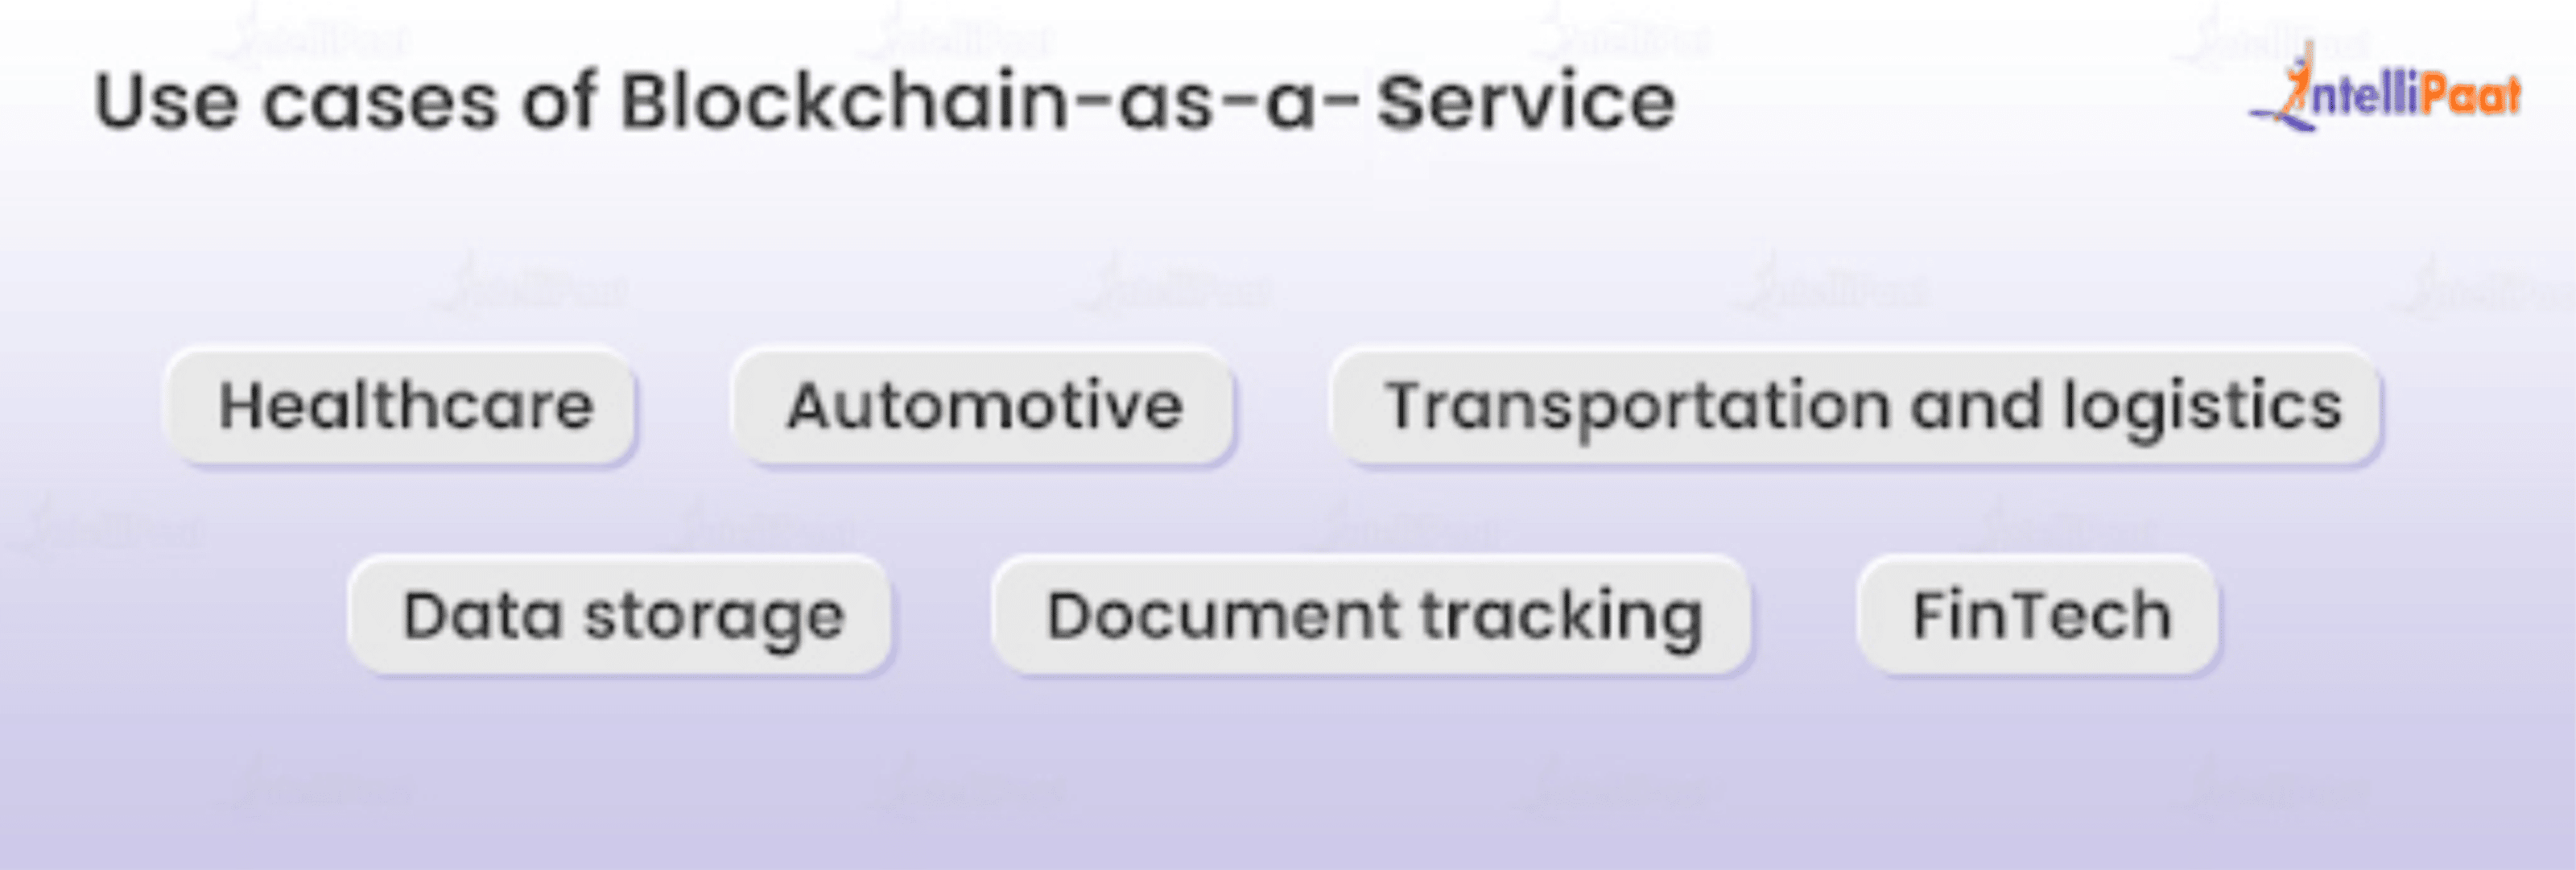 Use of Blockchain-as-a-Service